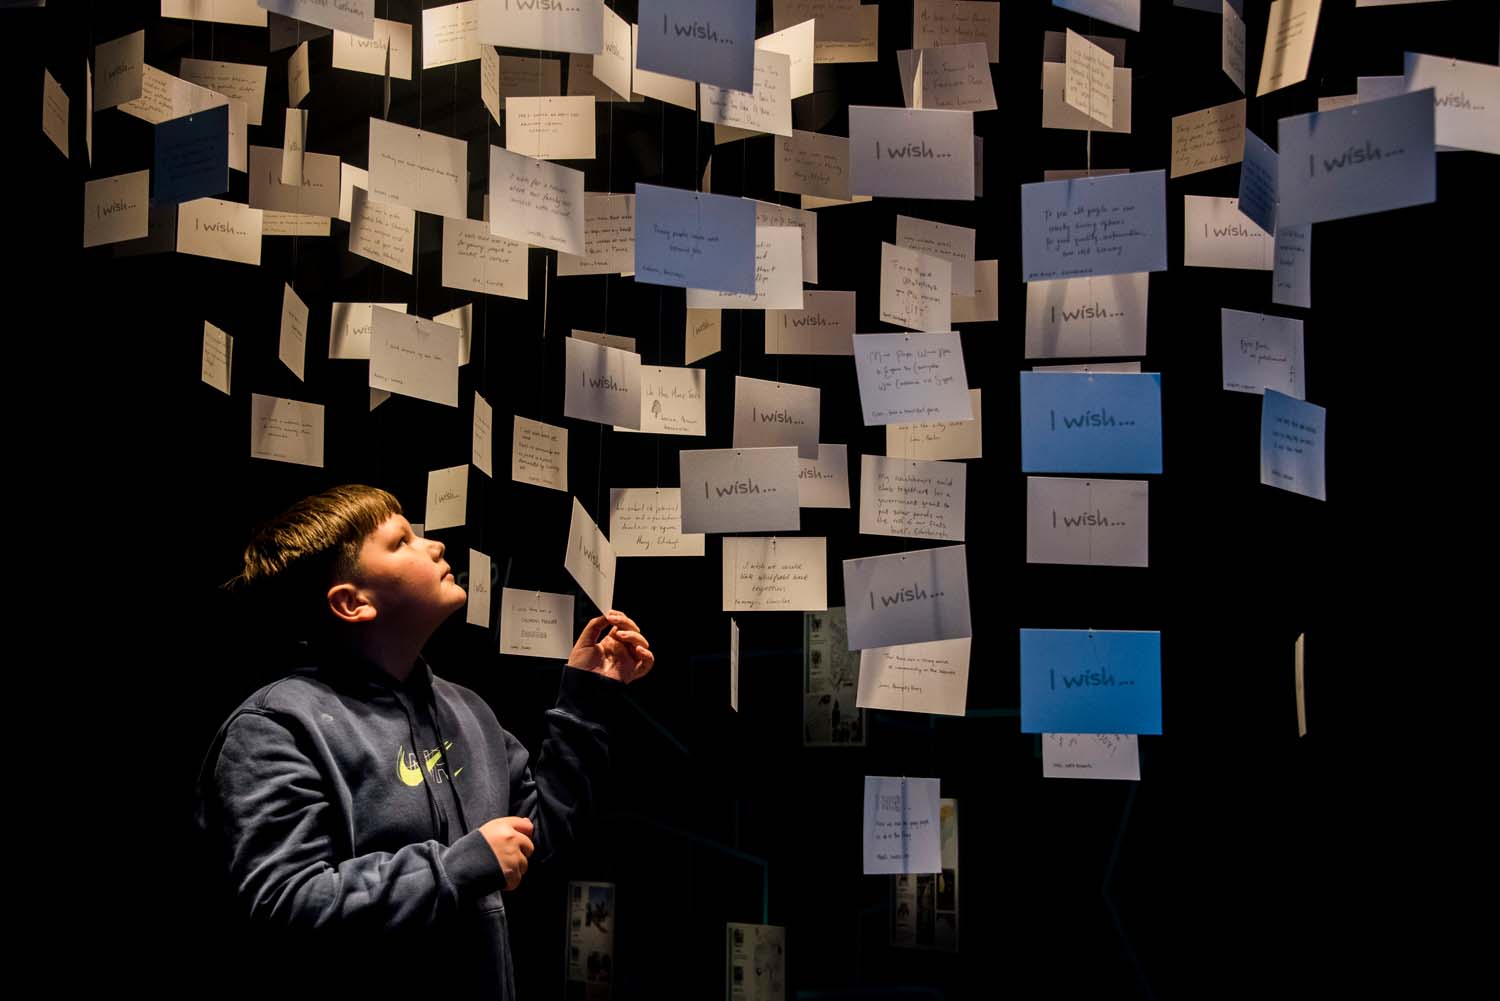 A boy in a dimly lit exhibition space looking up at postcards hanging from the ceiling. The postcards contain wishes of citizens for the future of their place.